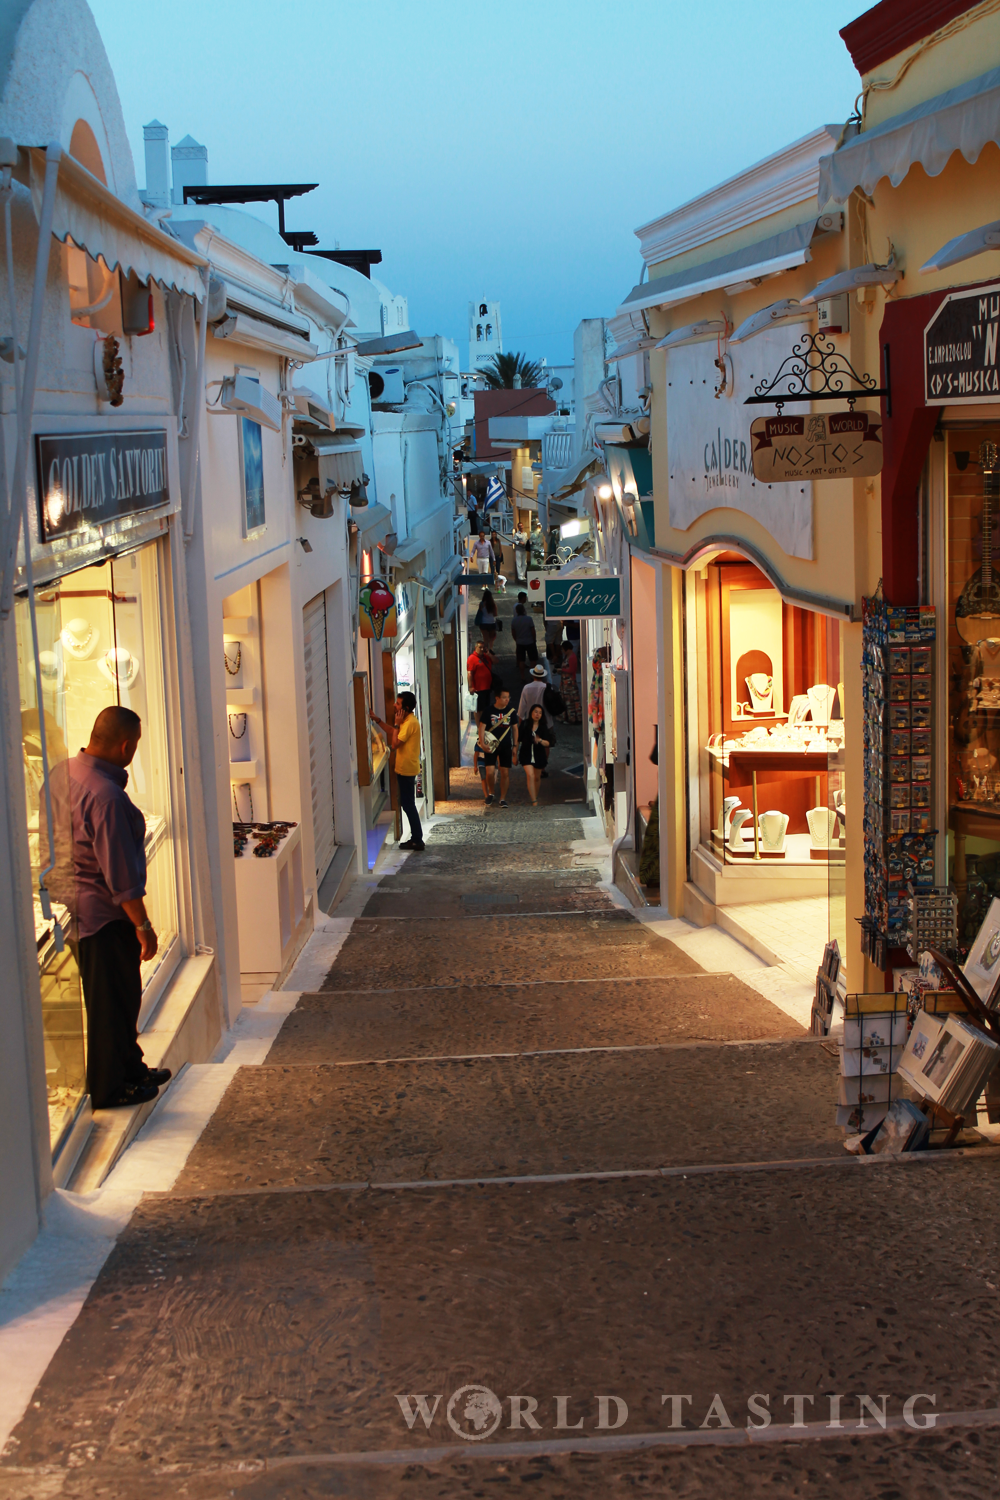 Small streets and jewelry shops are typical for Fira